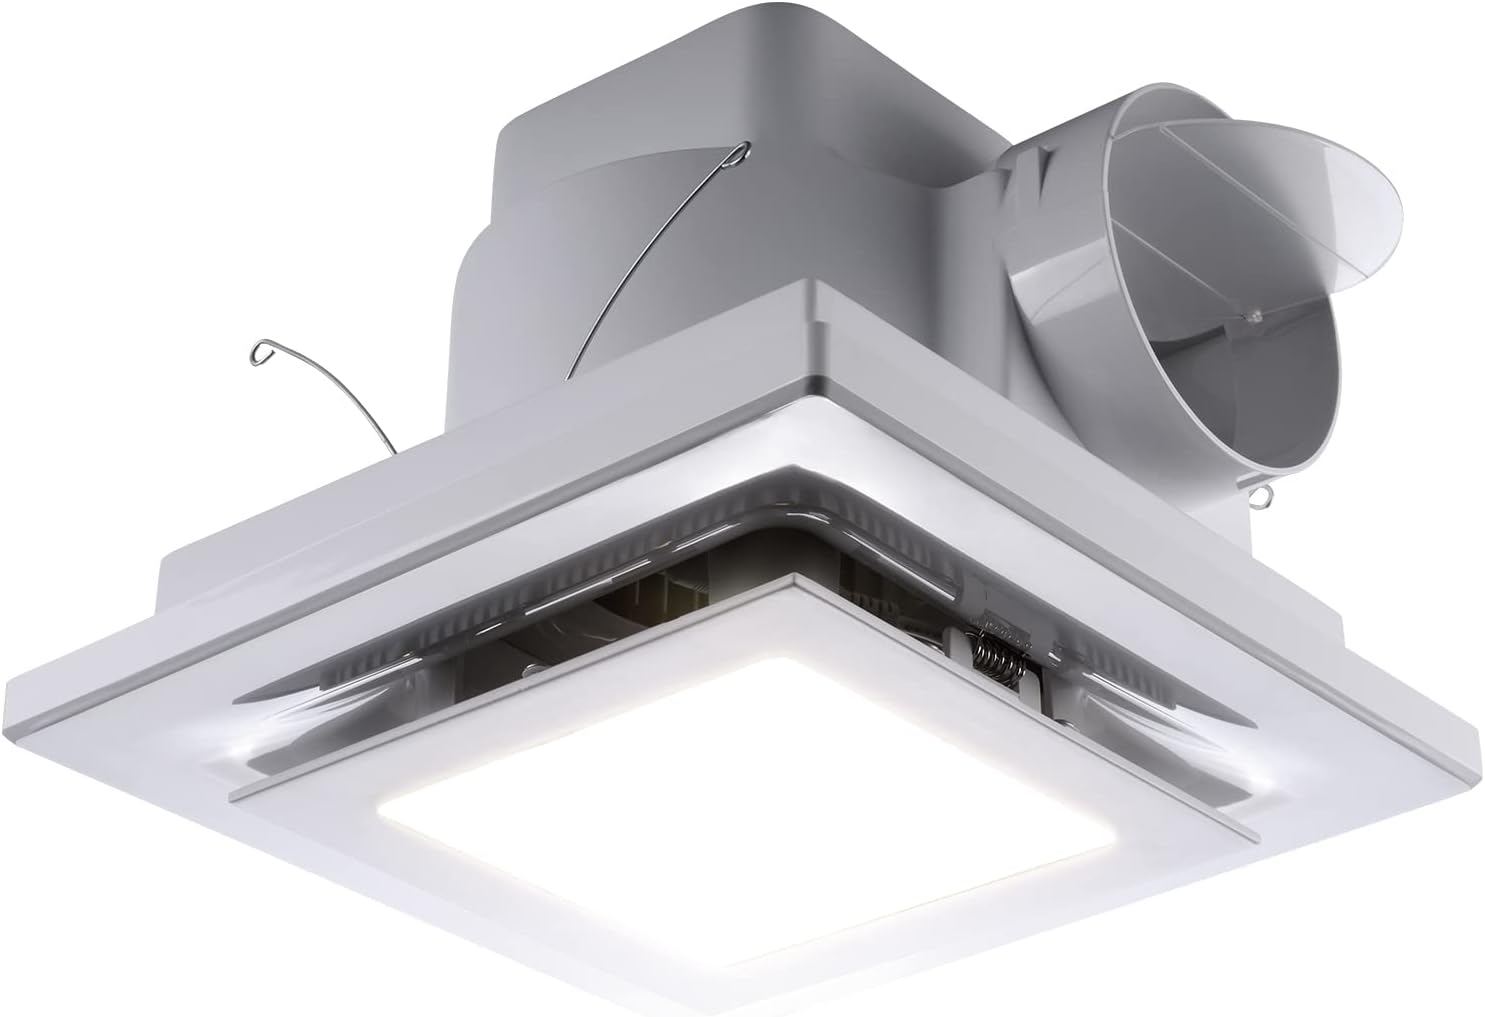 Zeyzer Bathroom Exhaust Fan with LED Light Square [...]